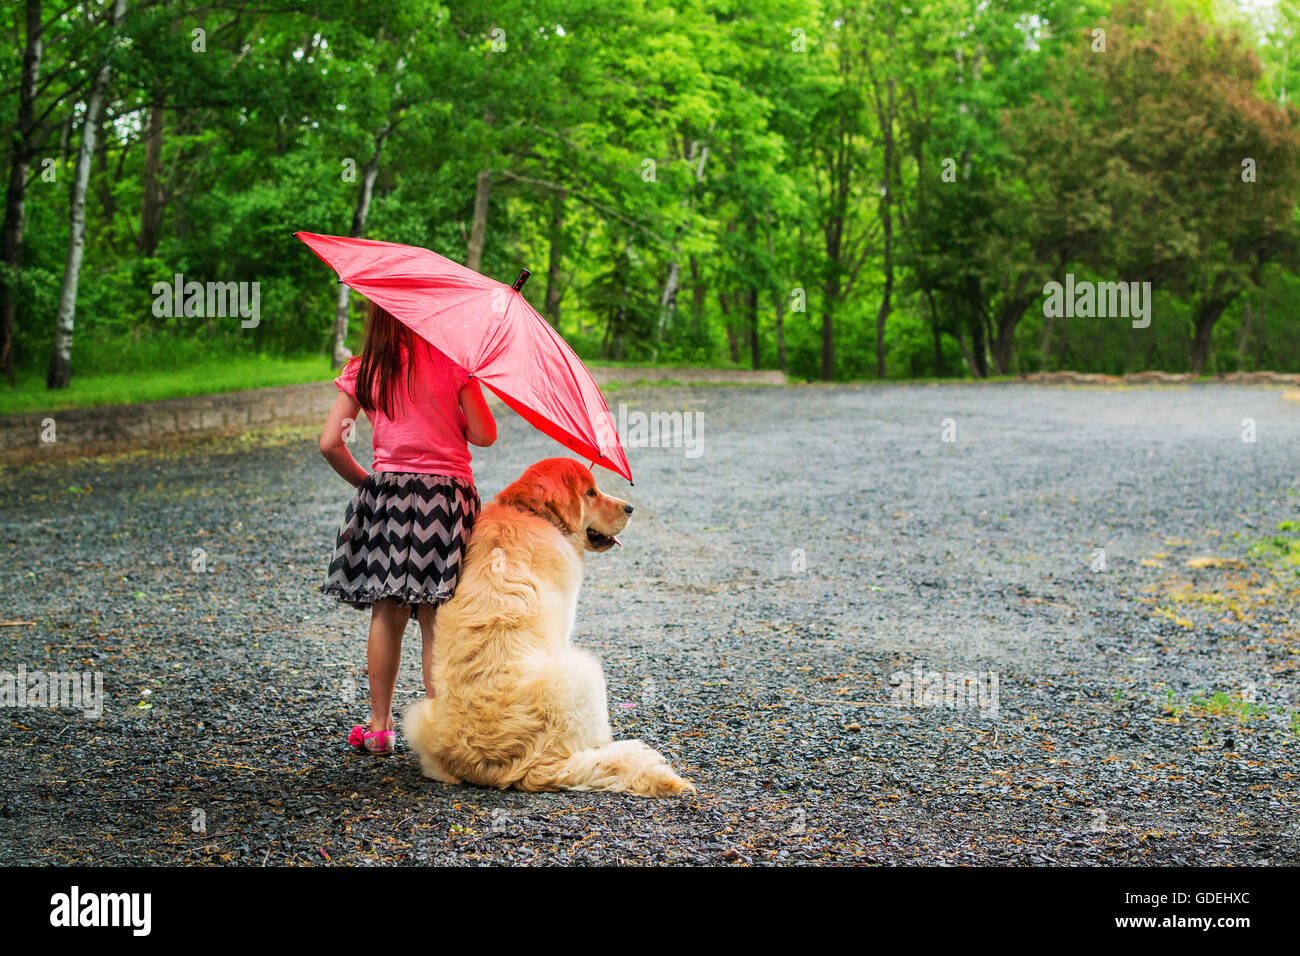 Girl and golden retriever puppy dog standing on footpath under an umbrella in rain Stock Photo